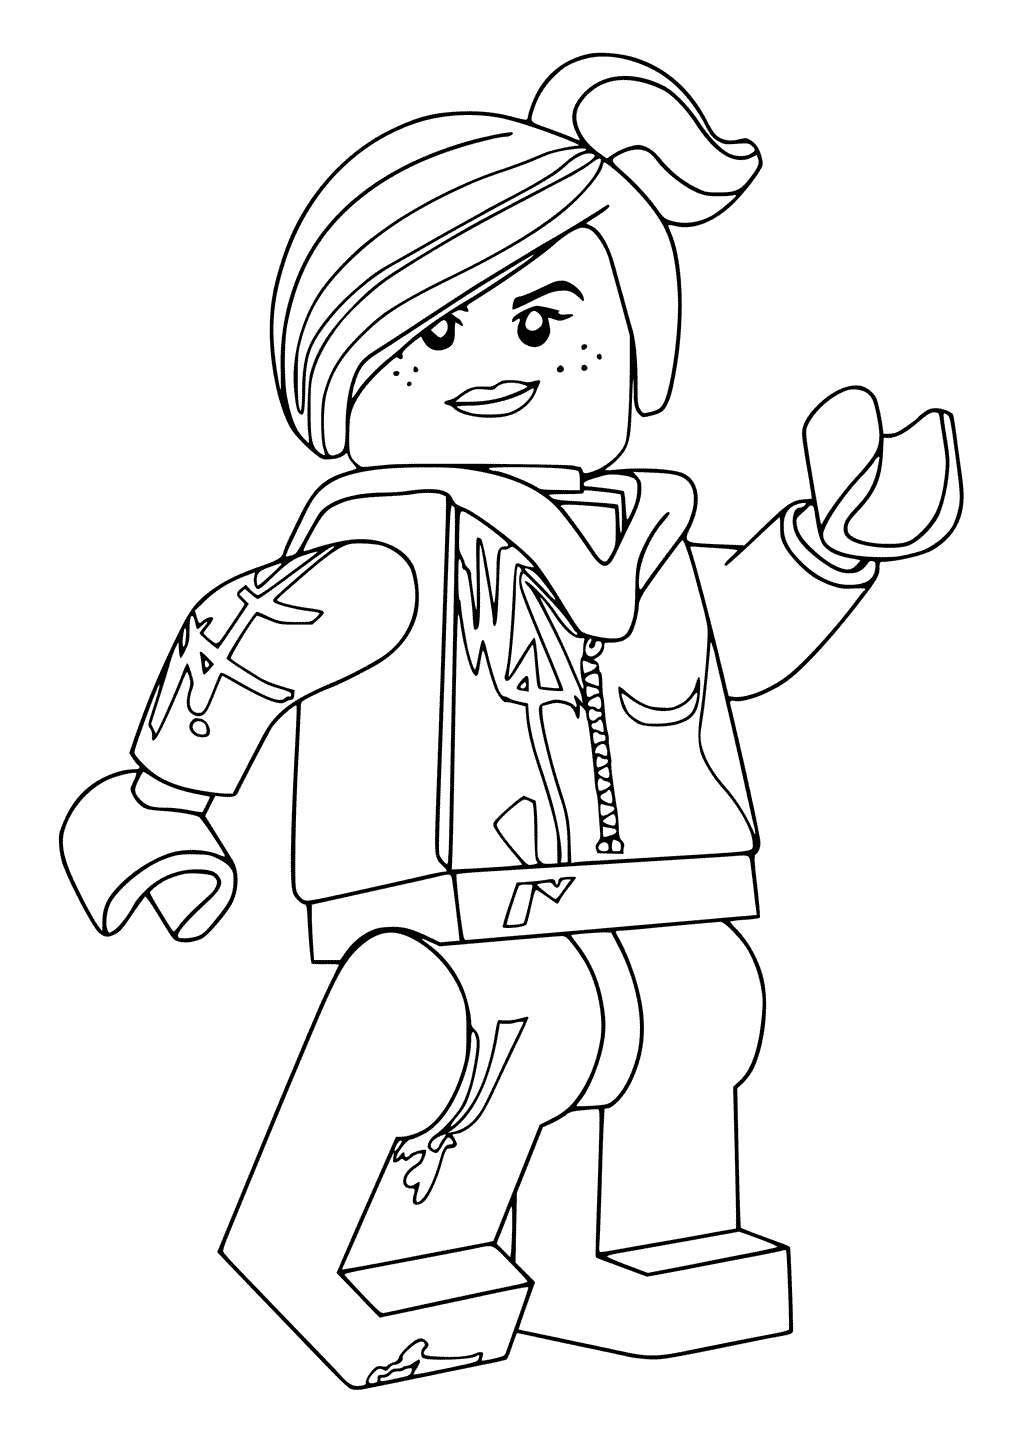 26+ Coloring Pages Of The Lego Movie